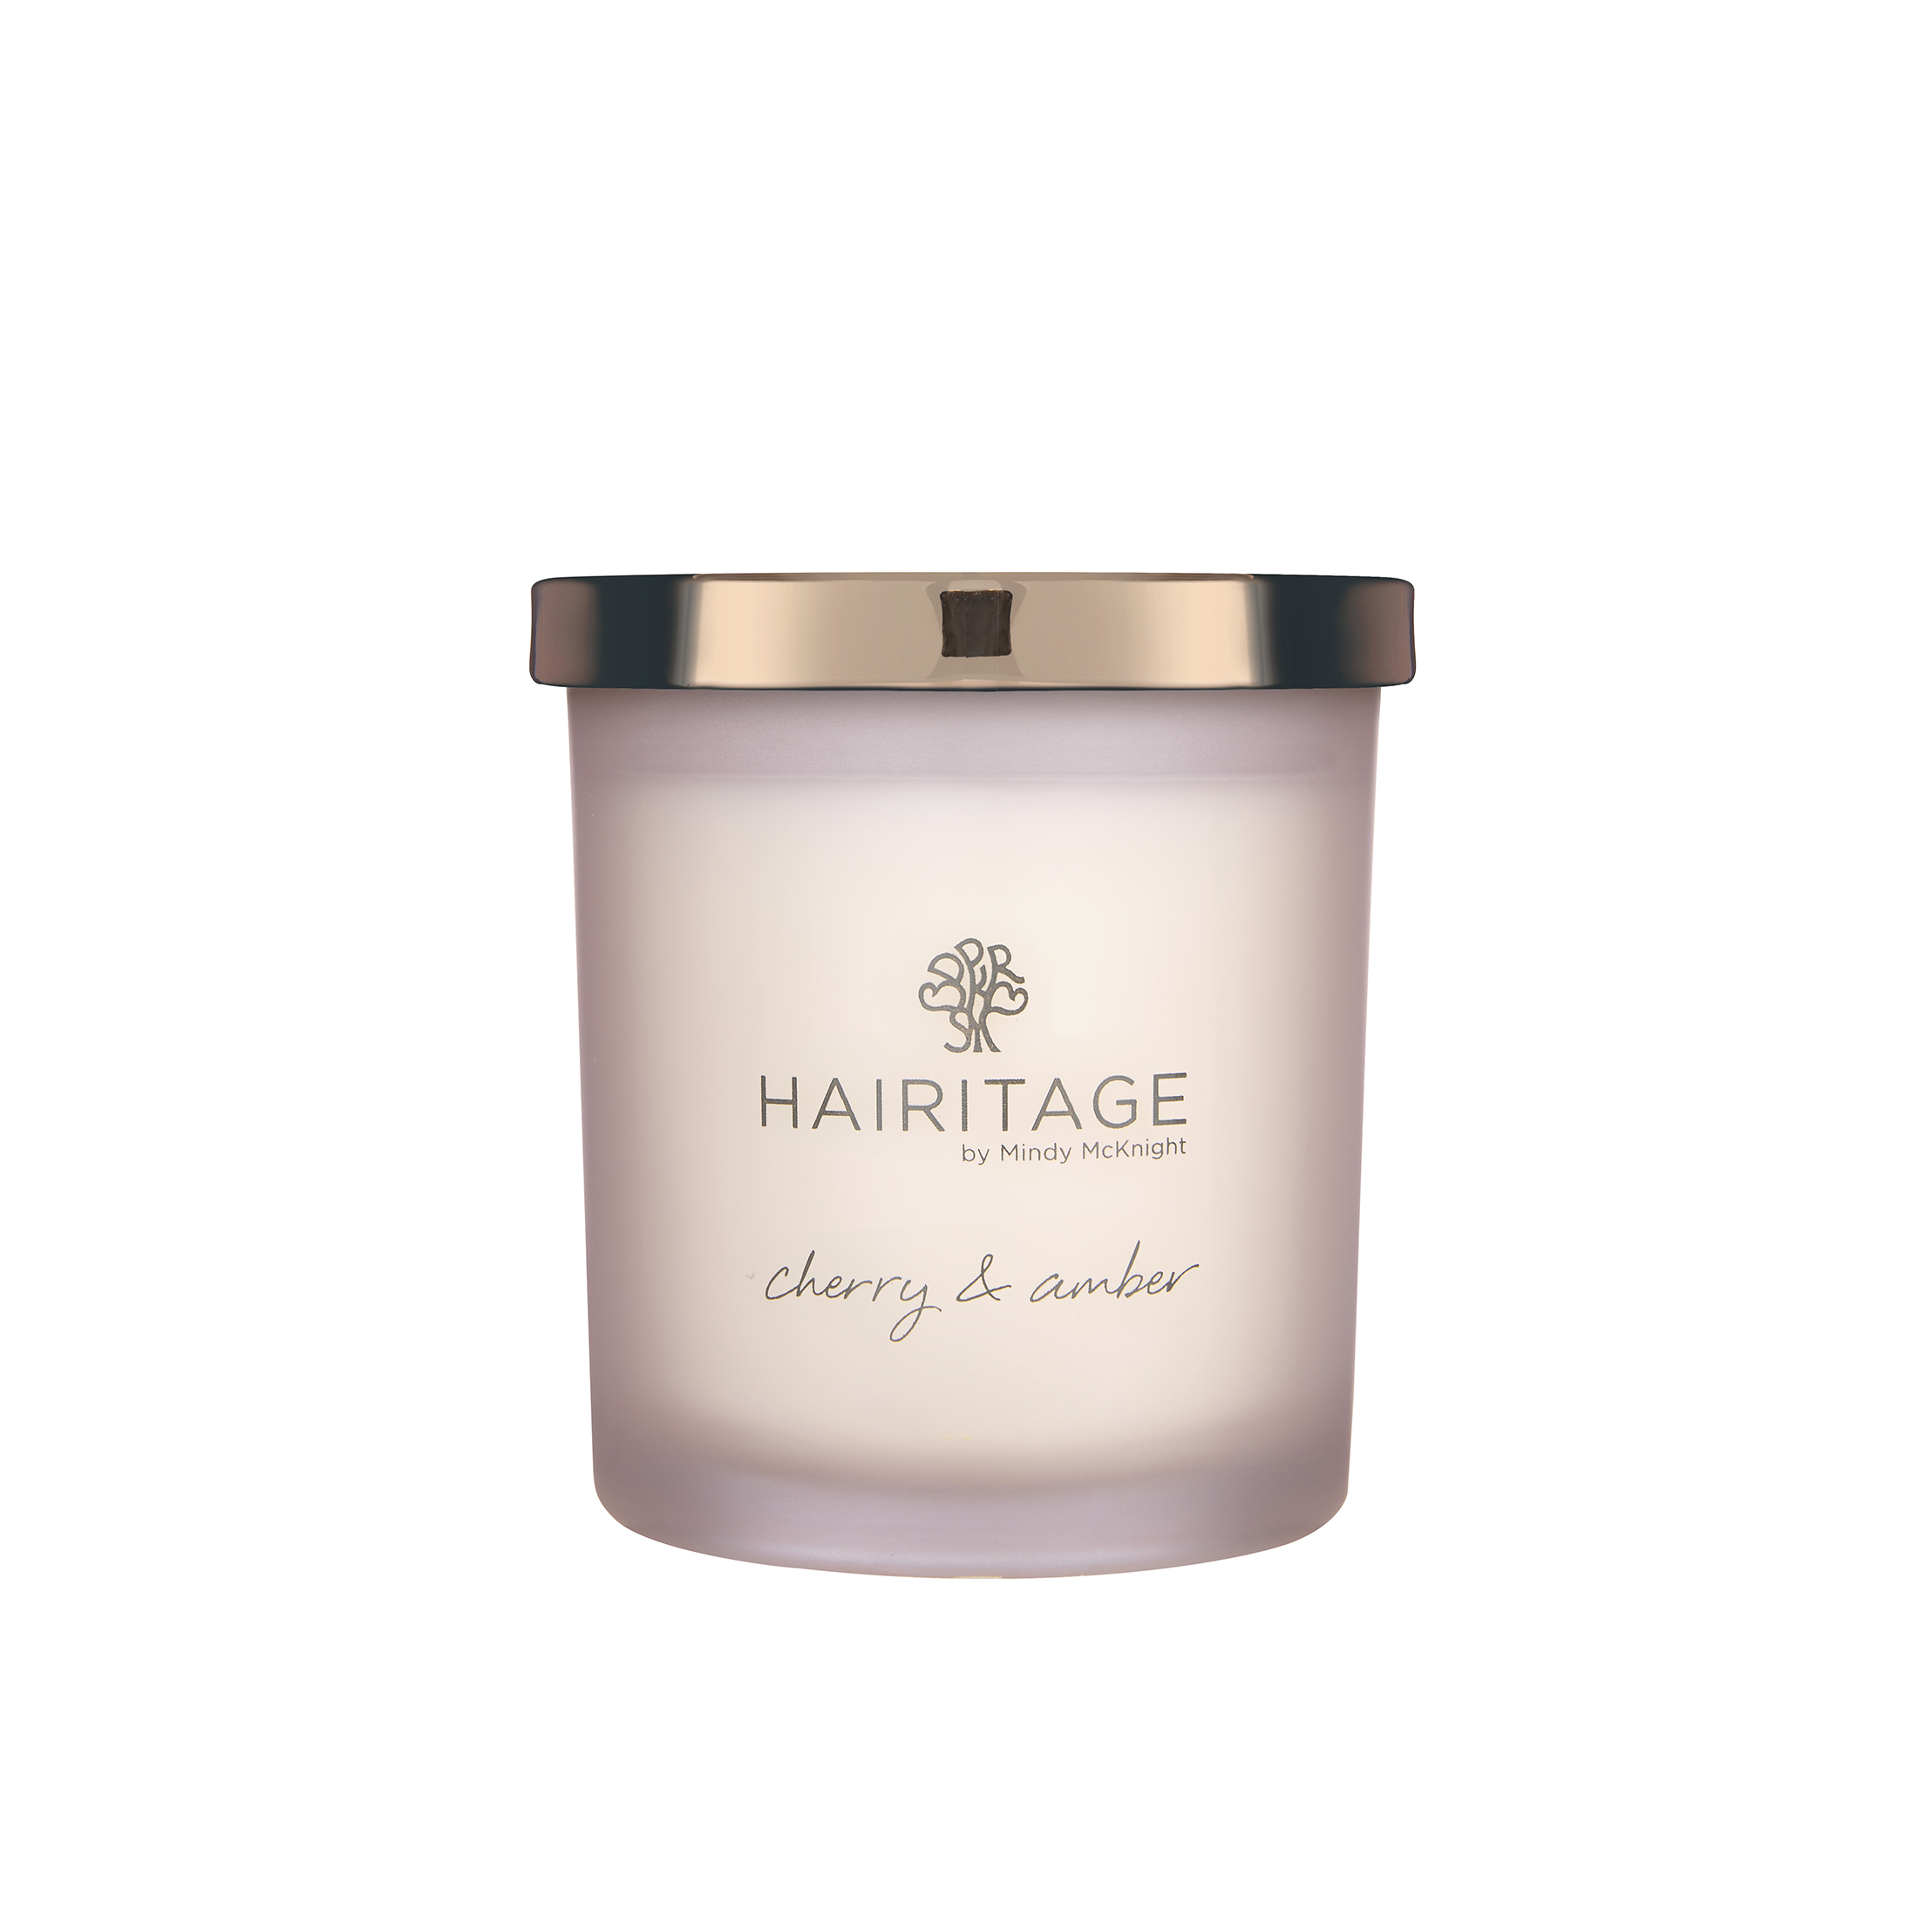 Hairitage Light Me Up Cherry & Amber Scented Candle | Cotton Wick & Soy Wax Blend, 7 oz. - image 1 of 7